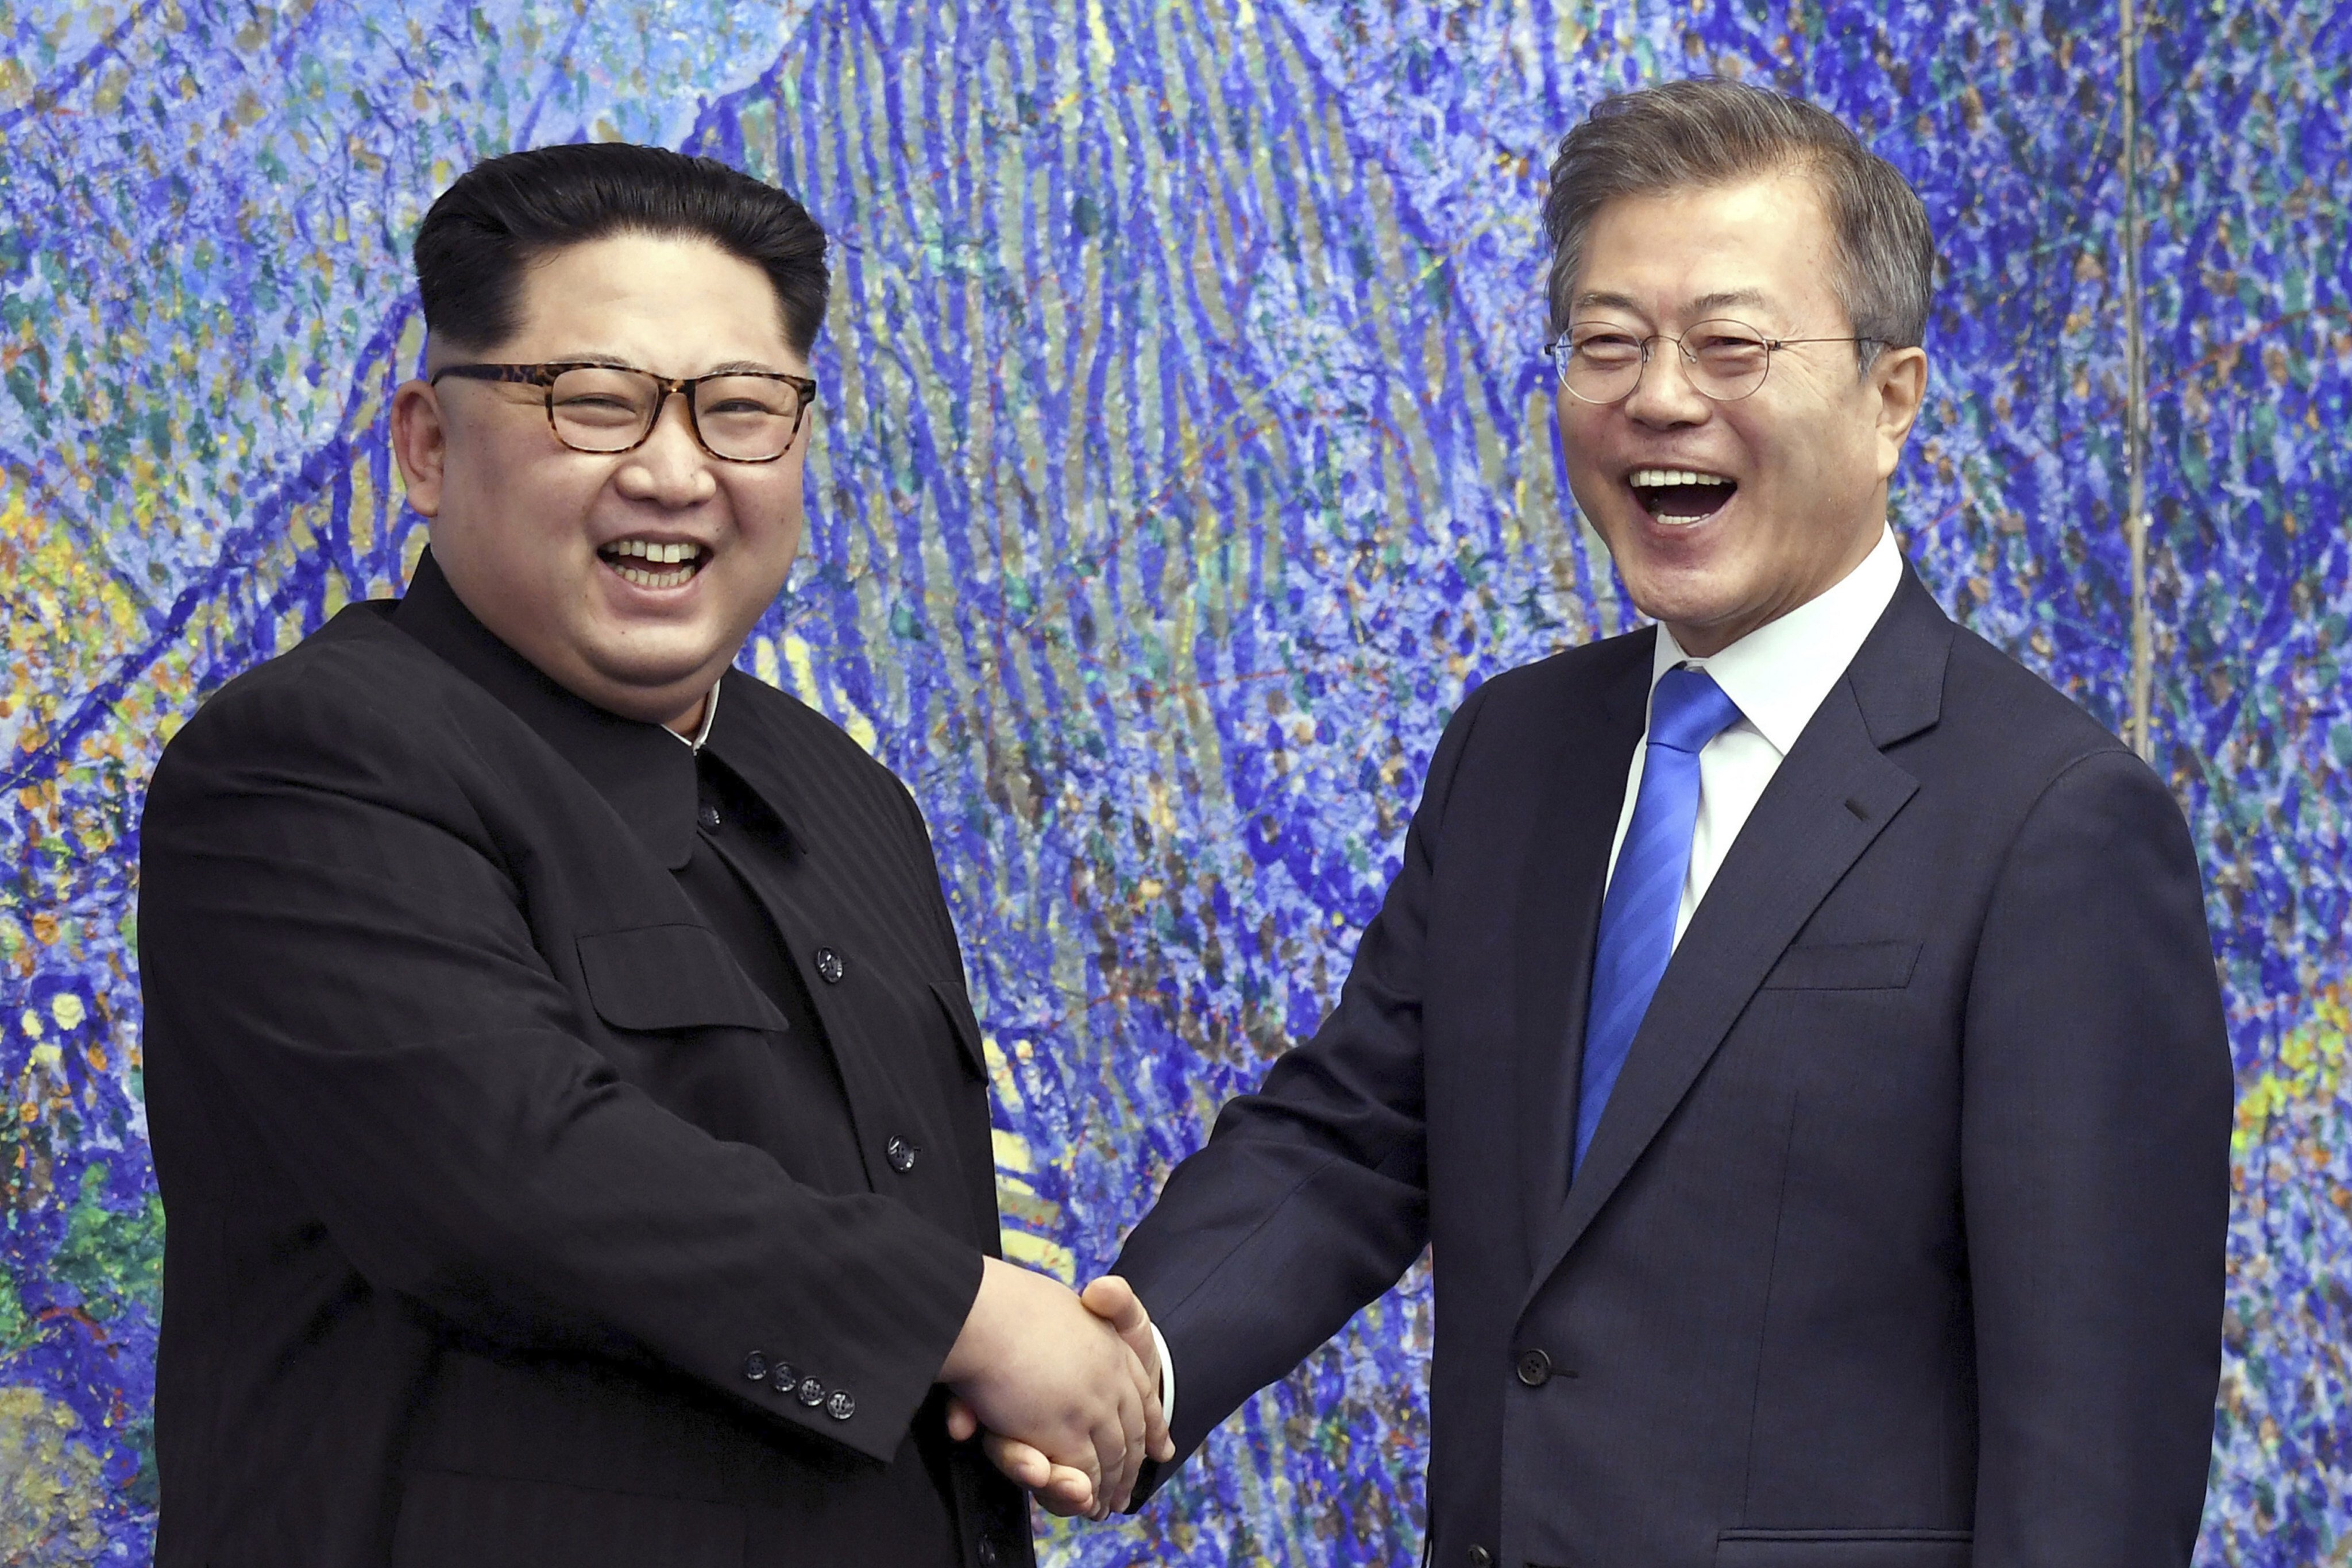 North Korean leader Kim Jong-un (left) and South Korean President Moon Jae-in enjoy a light moment in the Peace House at the border village of Panmunjom in the Demilitarized Zone on April 27, 2018. Moon appears anxious to leave a legacy of North-South amity when he steps down next year. Photo: AP